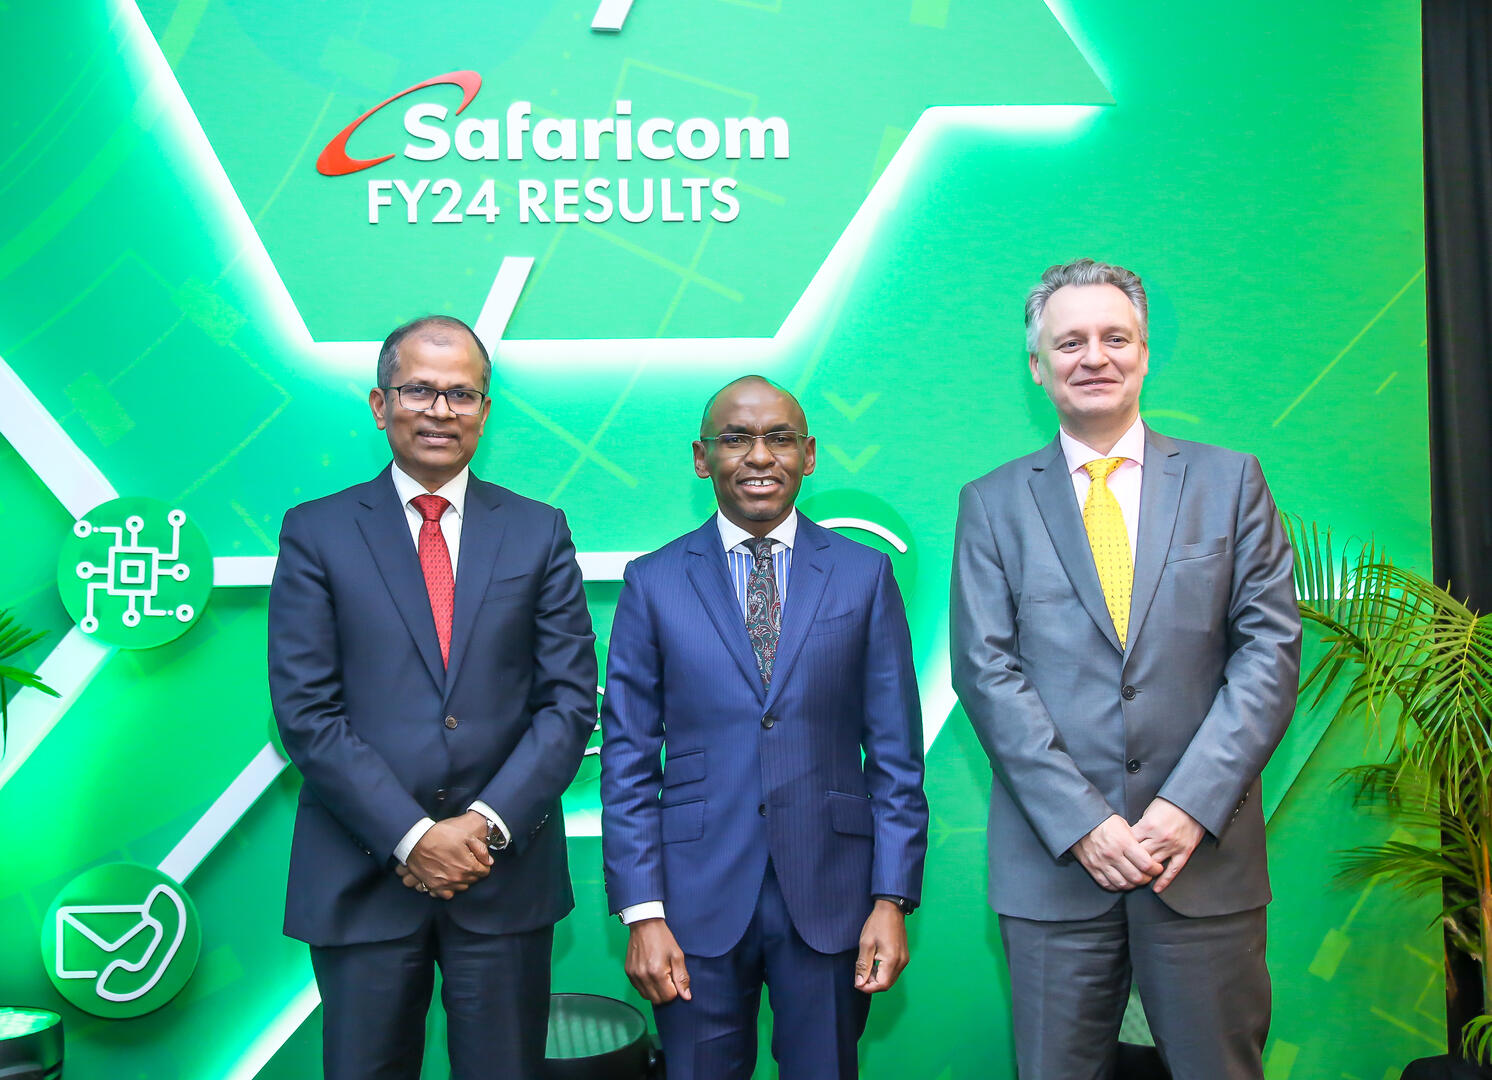 Safaricom earnings hit Kes140billion, becoming the first company in the region to hit past the billion-dollar mark